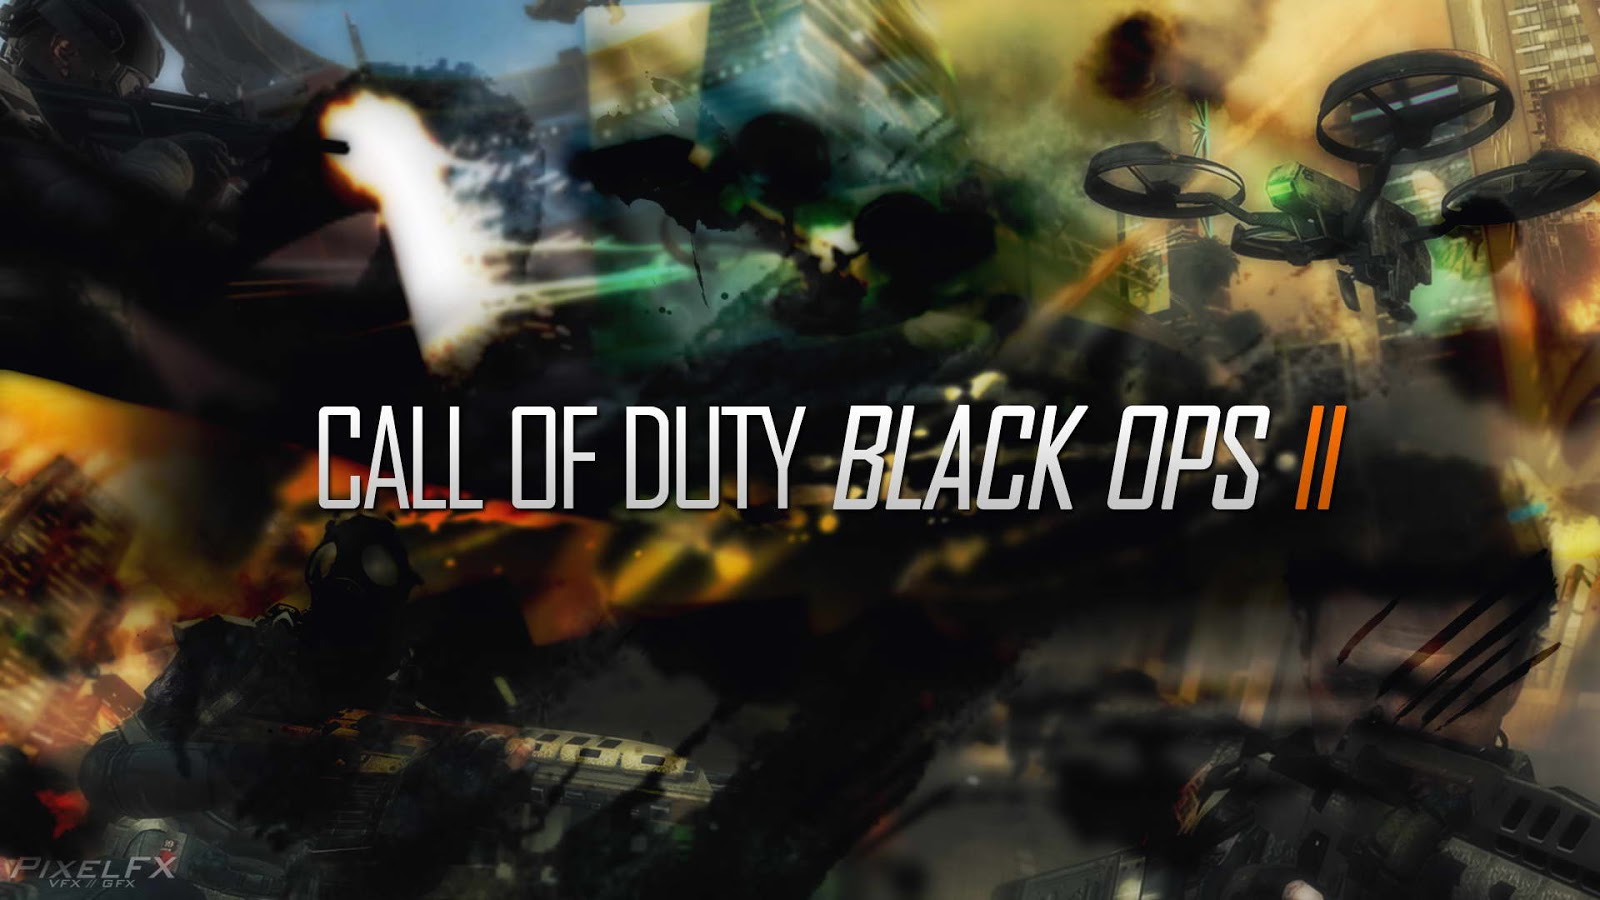 call of duty black ops 2 wallpaper call of duty black ops 2